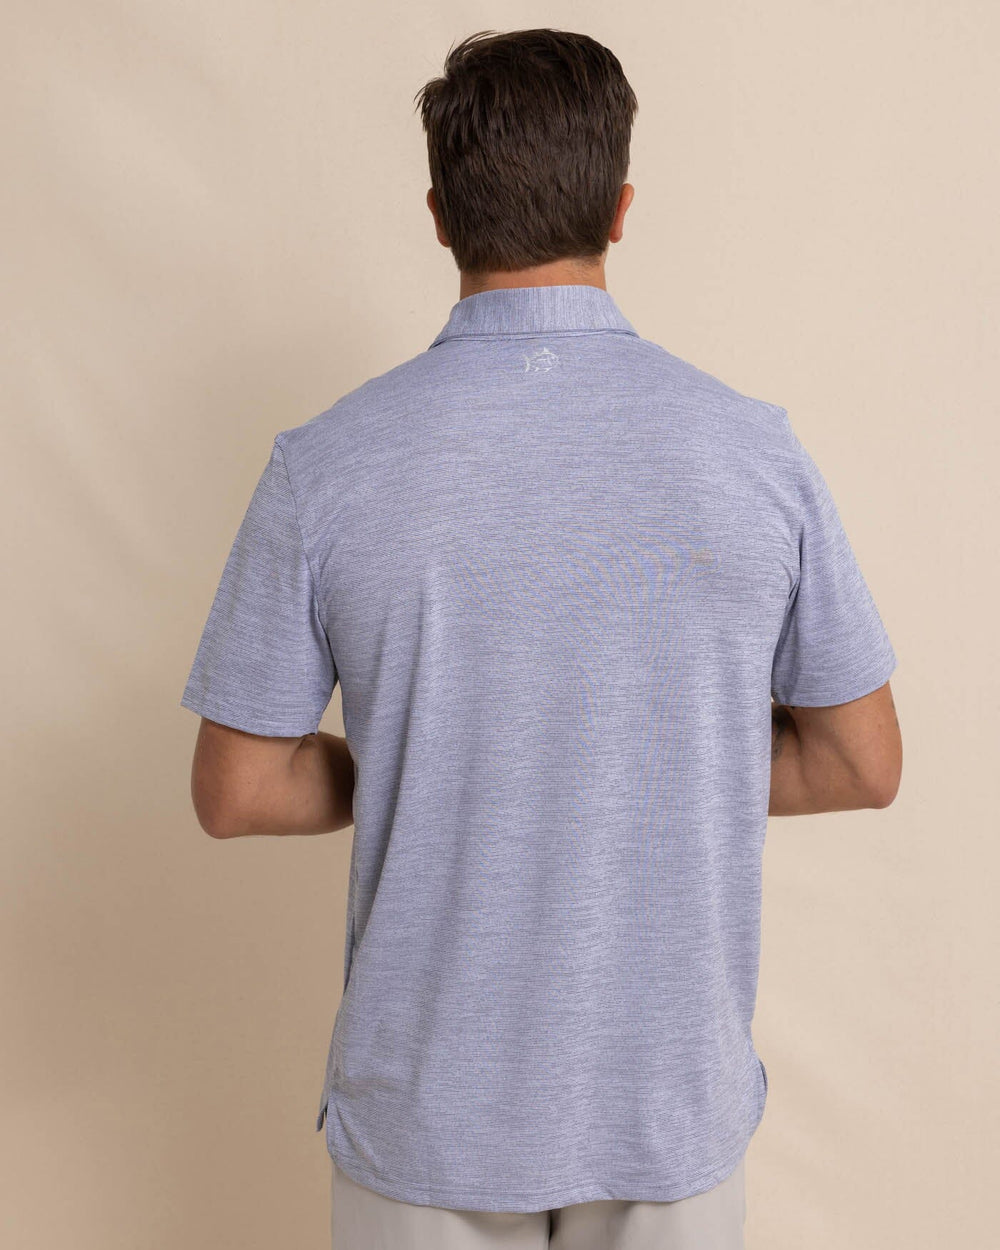 The back view of the Southern Tide Team Colors Driver Spacedye Polo Shirt by Southern Tide - Navy